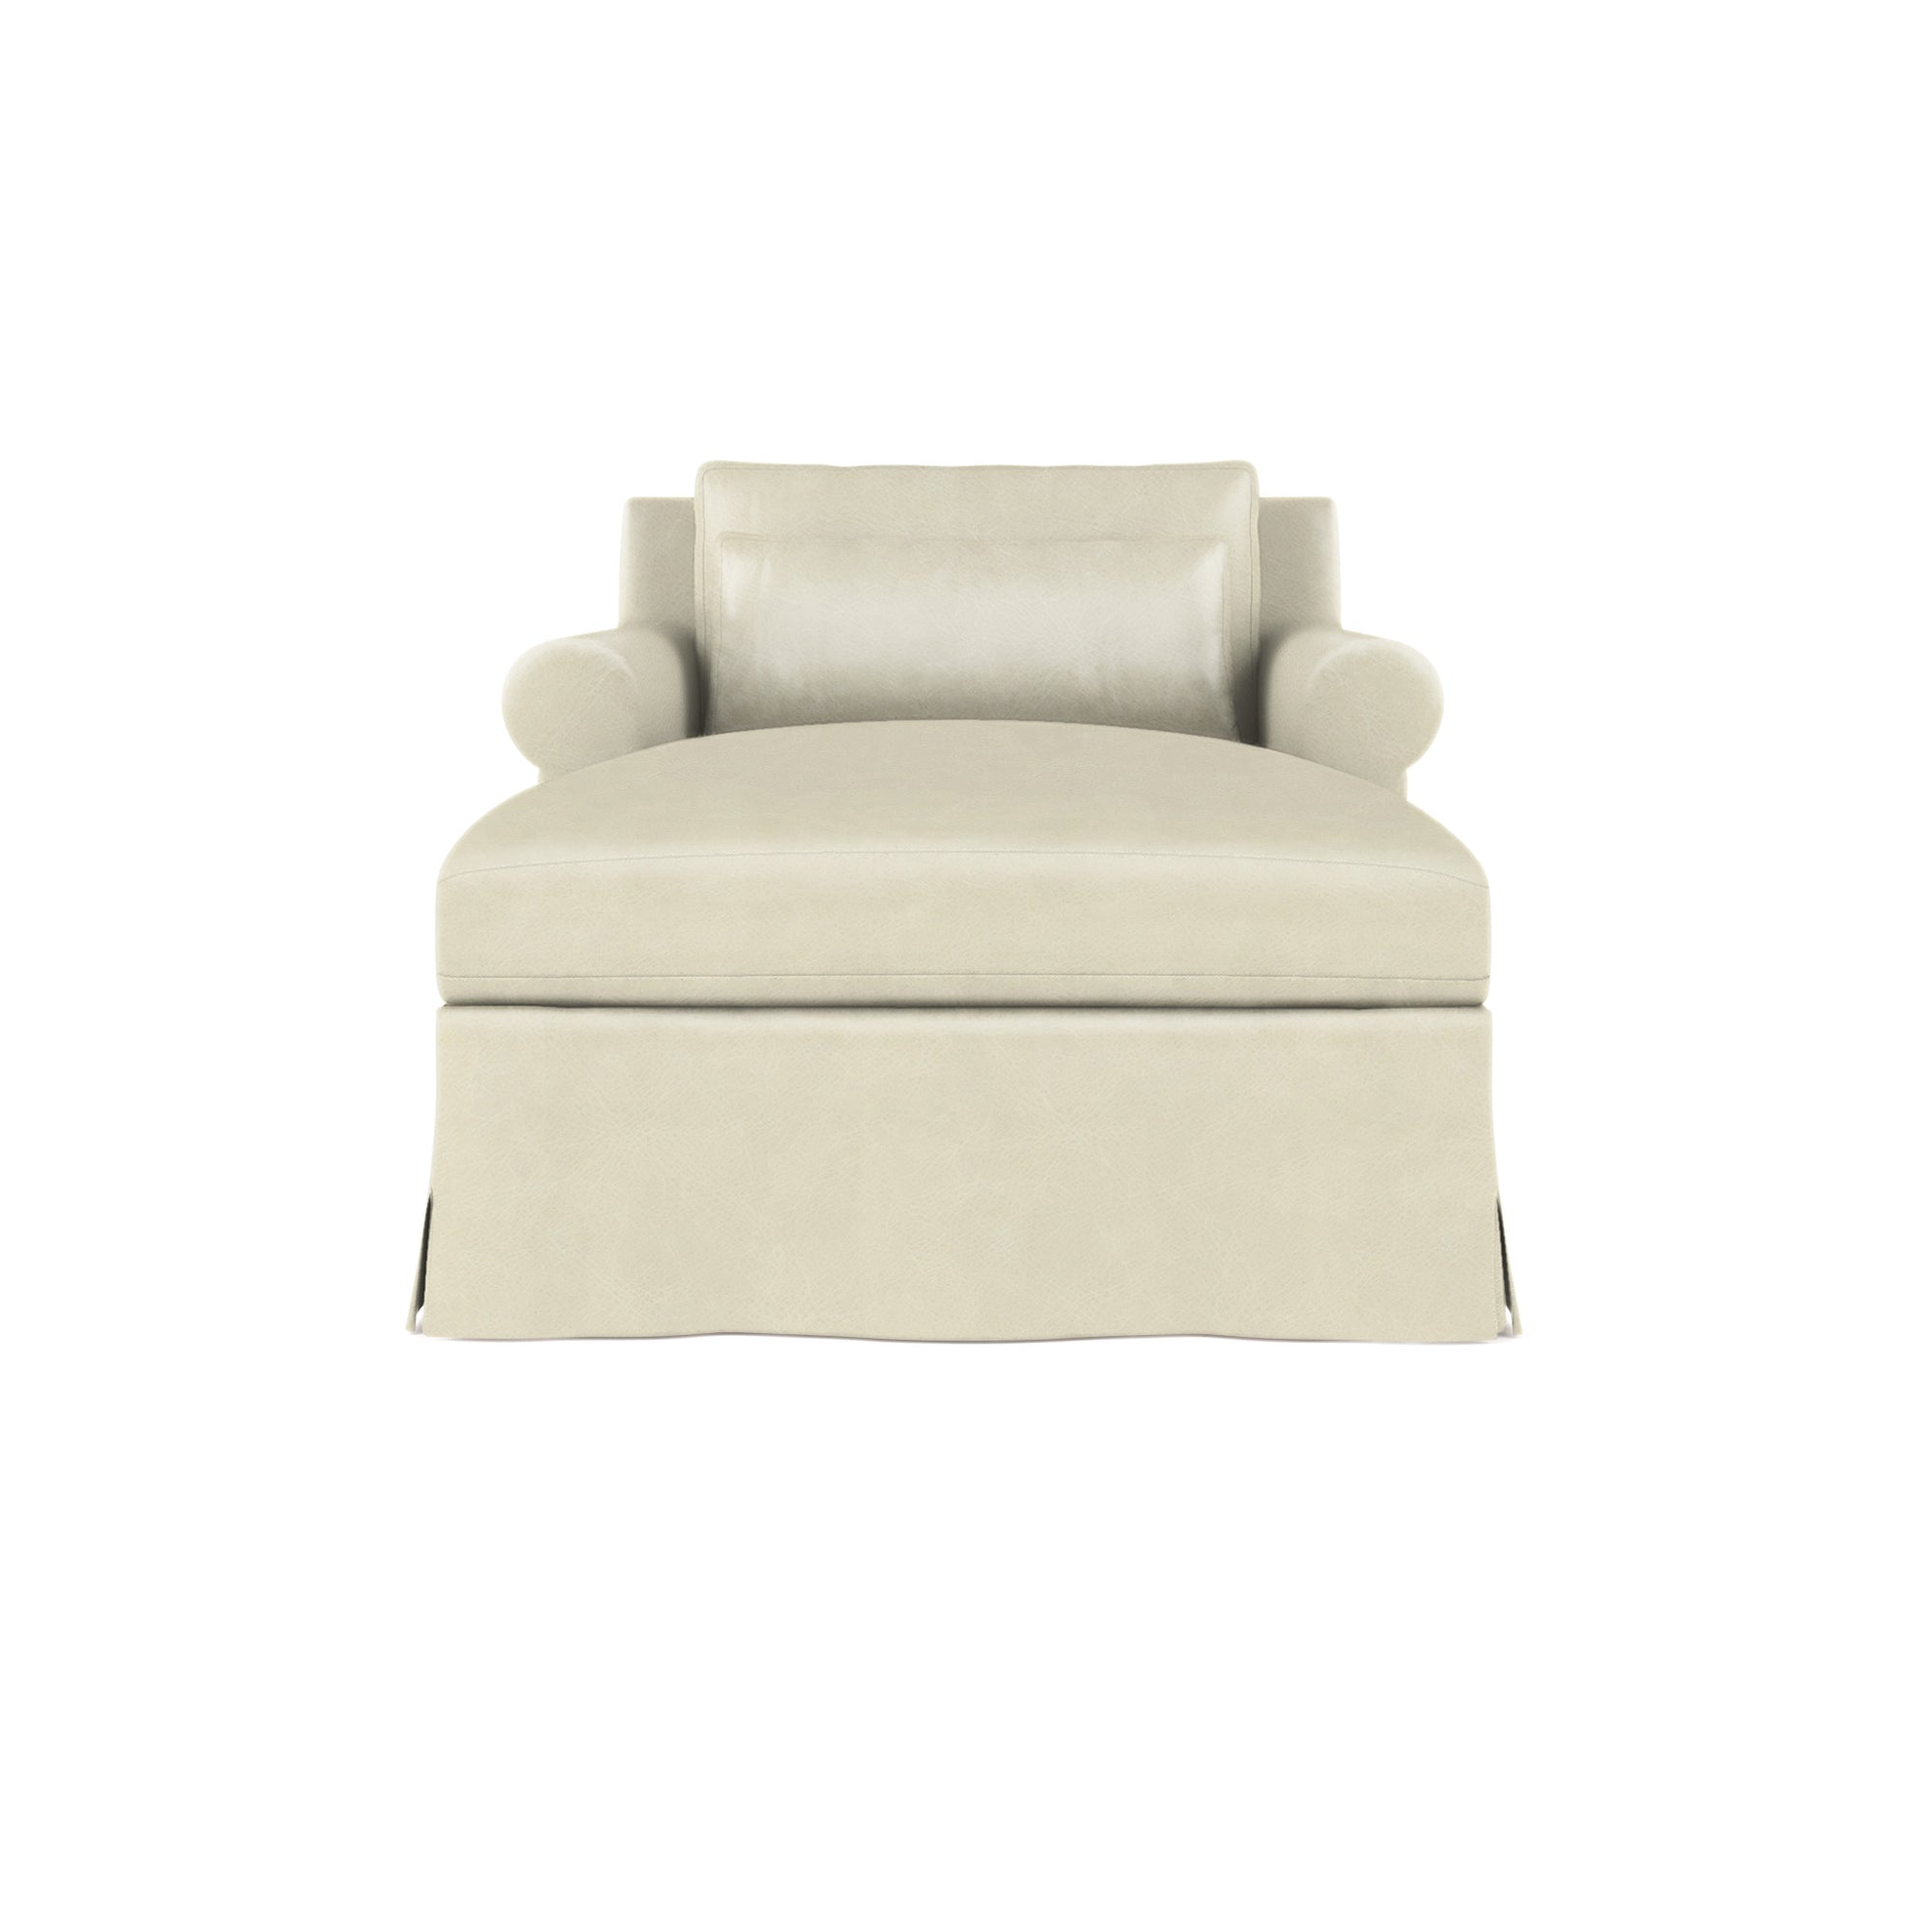 Ludlow Chaise - Alabaster Vintage Leather